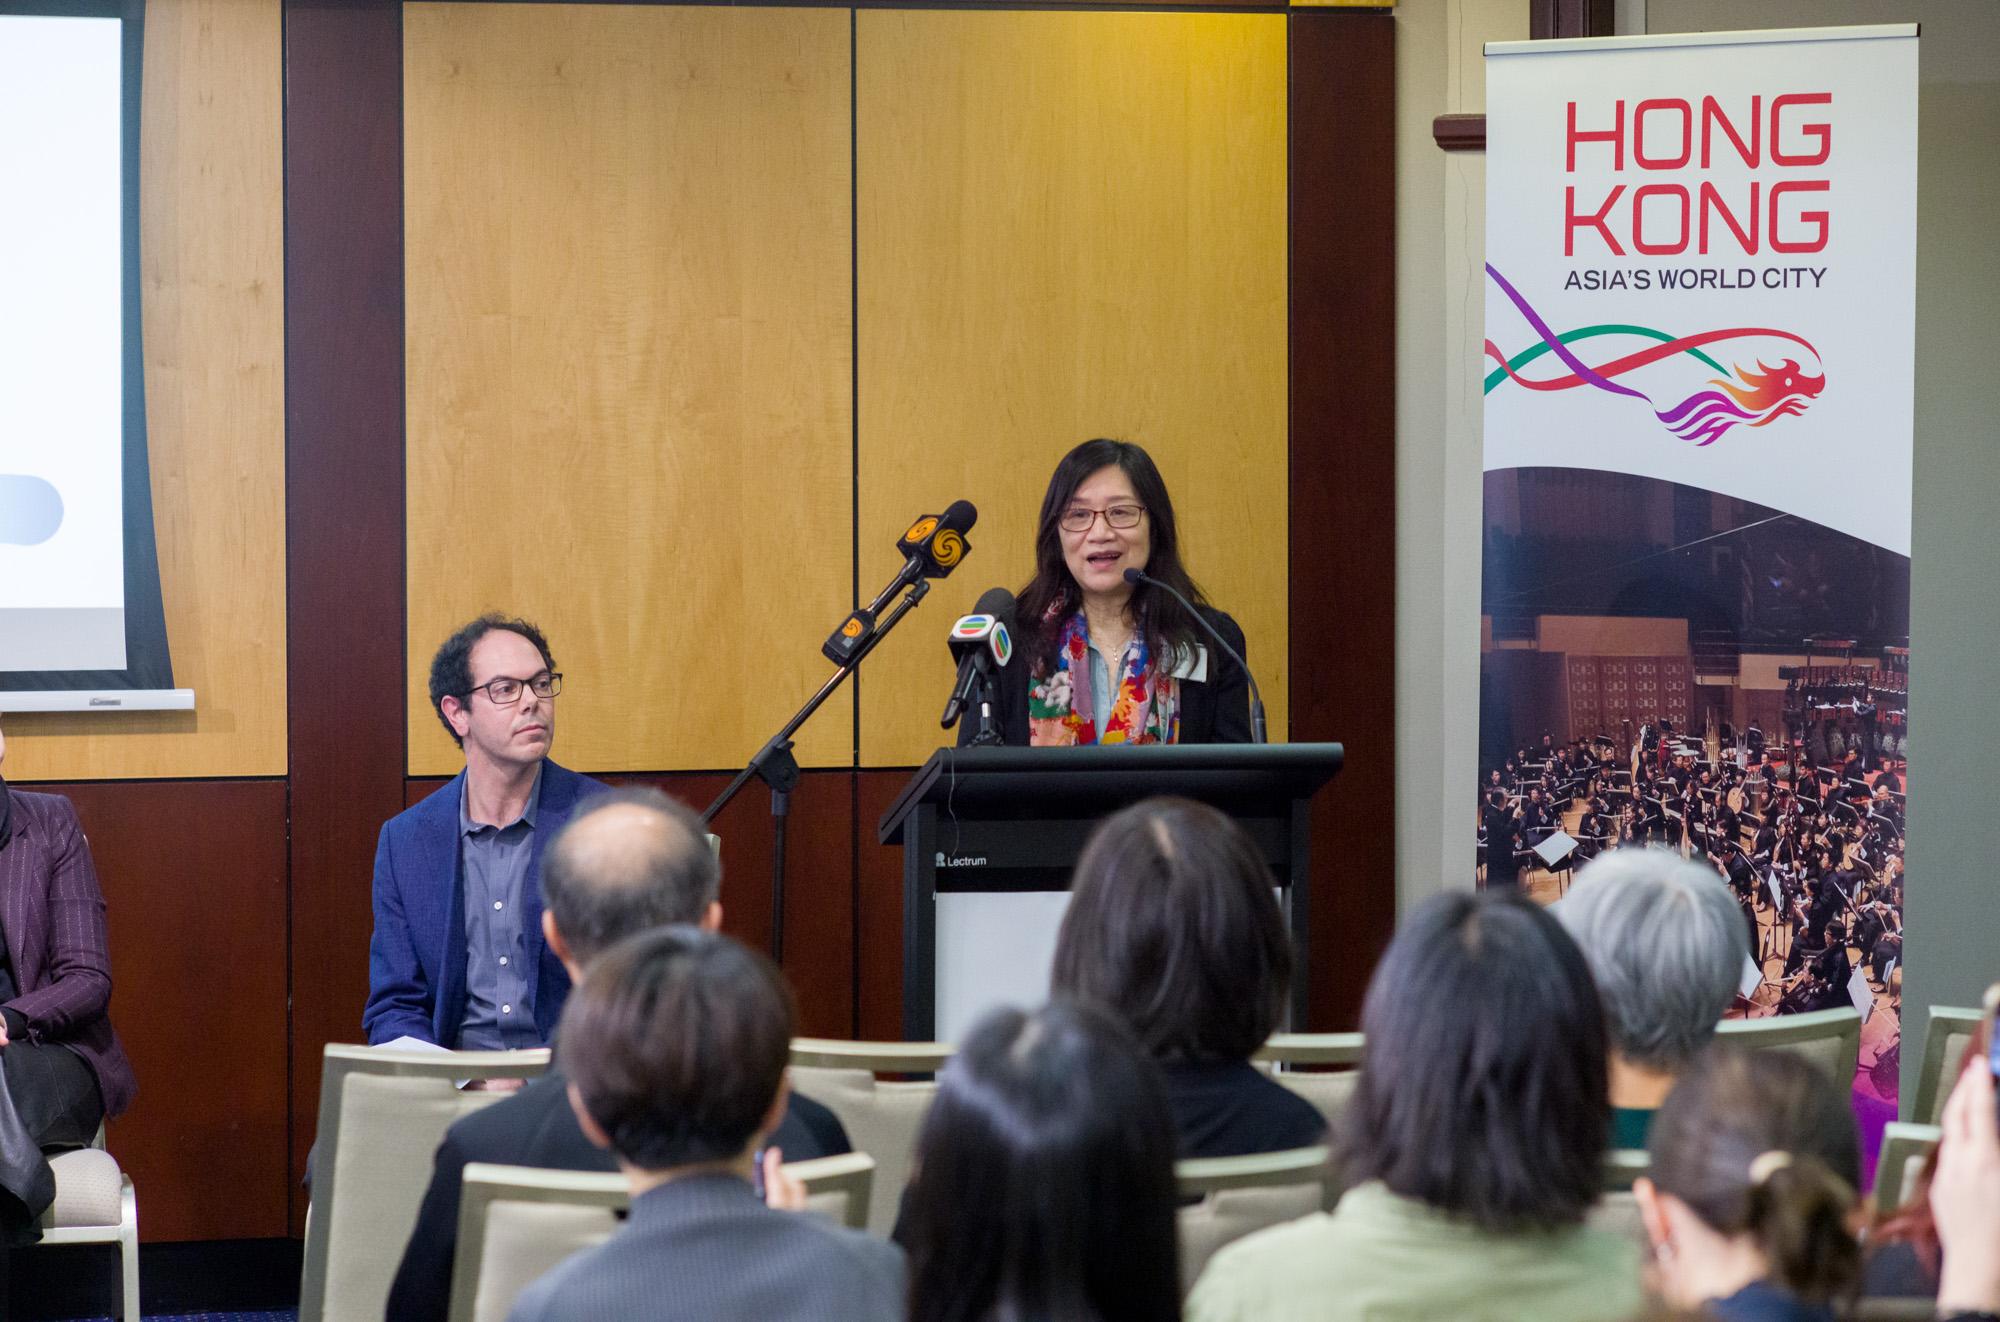 The Hong Kong Economic and Trade Office, Sydney hosted an "Arts Forum x Networking Reception" in Sydney, Australia, today (June 13) to foster cultural exchanges between Hong Kong and Australia. Photo shows the Chairman of the Hong Kong Arts Administrators Association, Mrs Vennie Ho, delivering a speech at the Arts Forum.